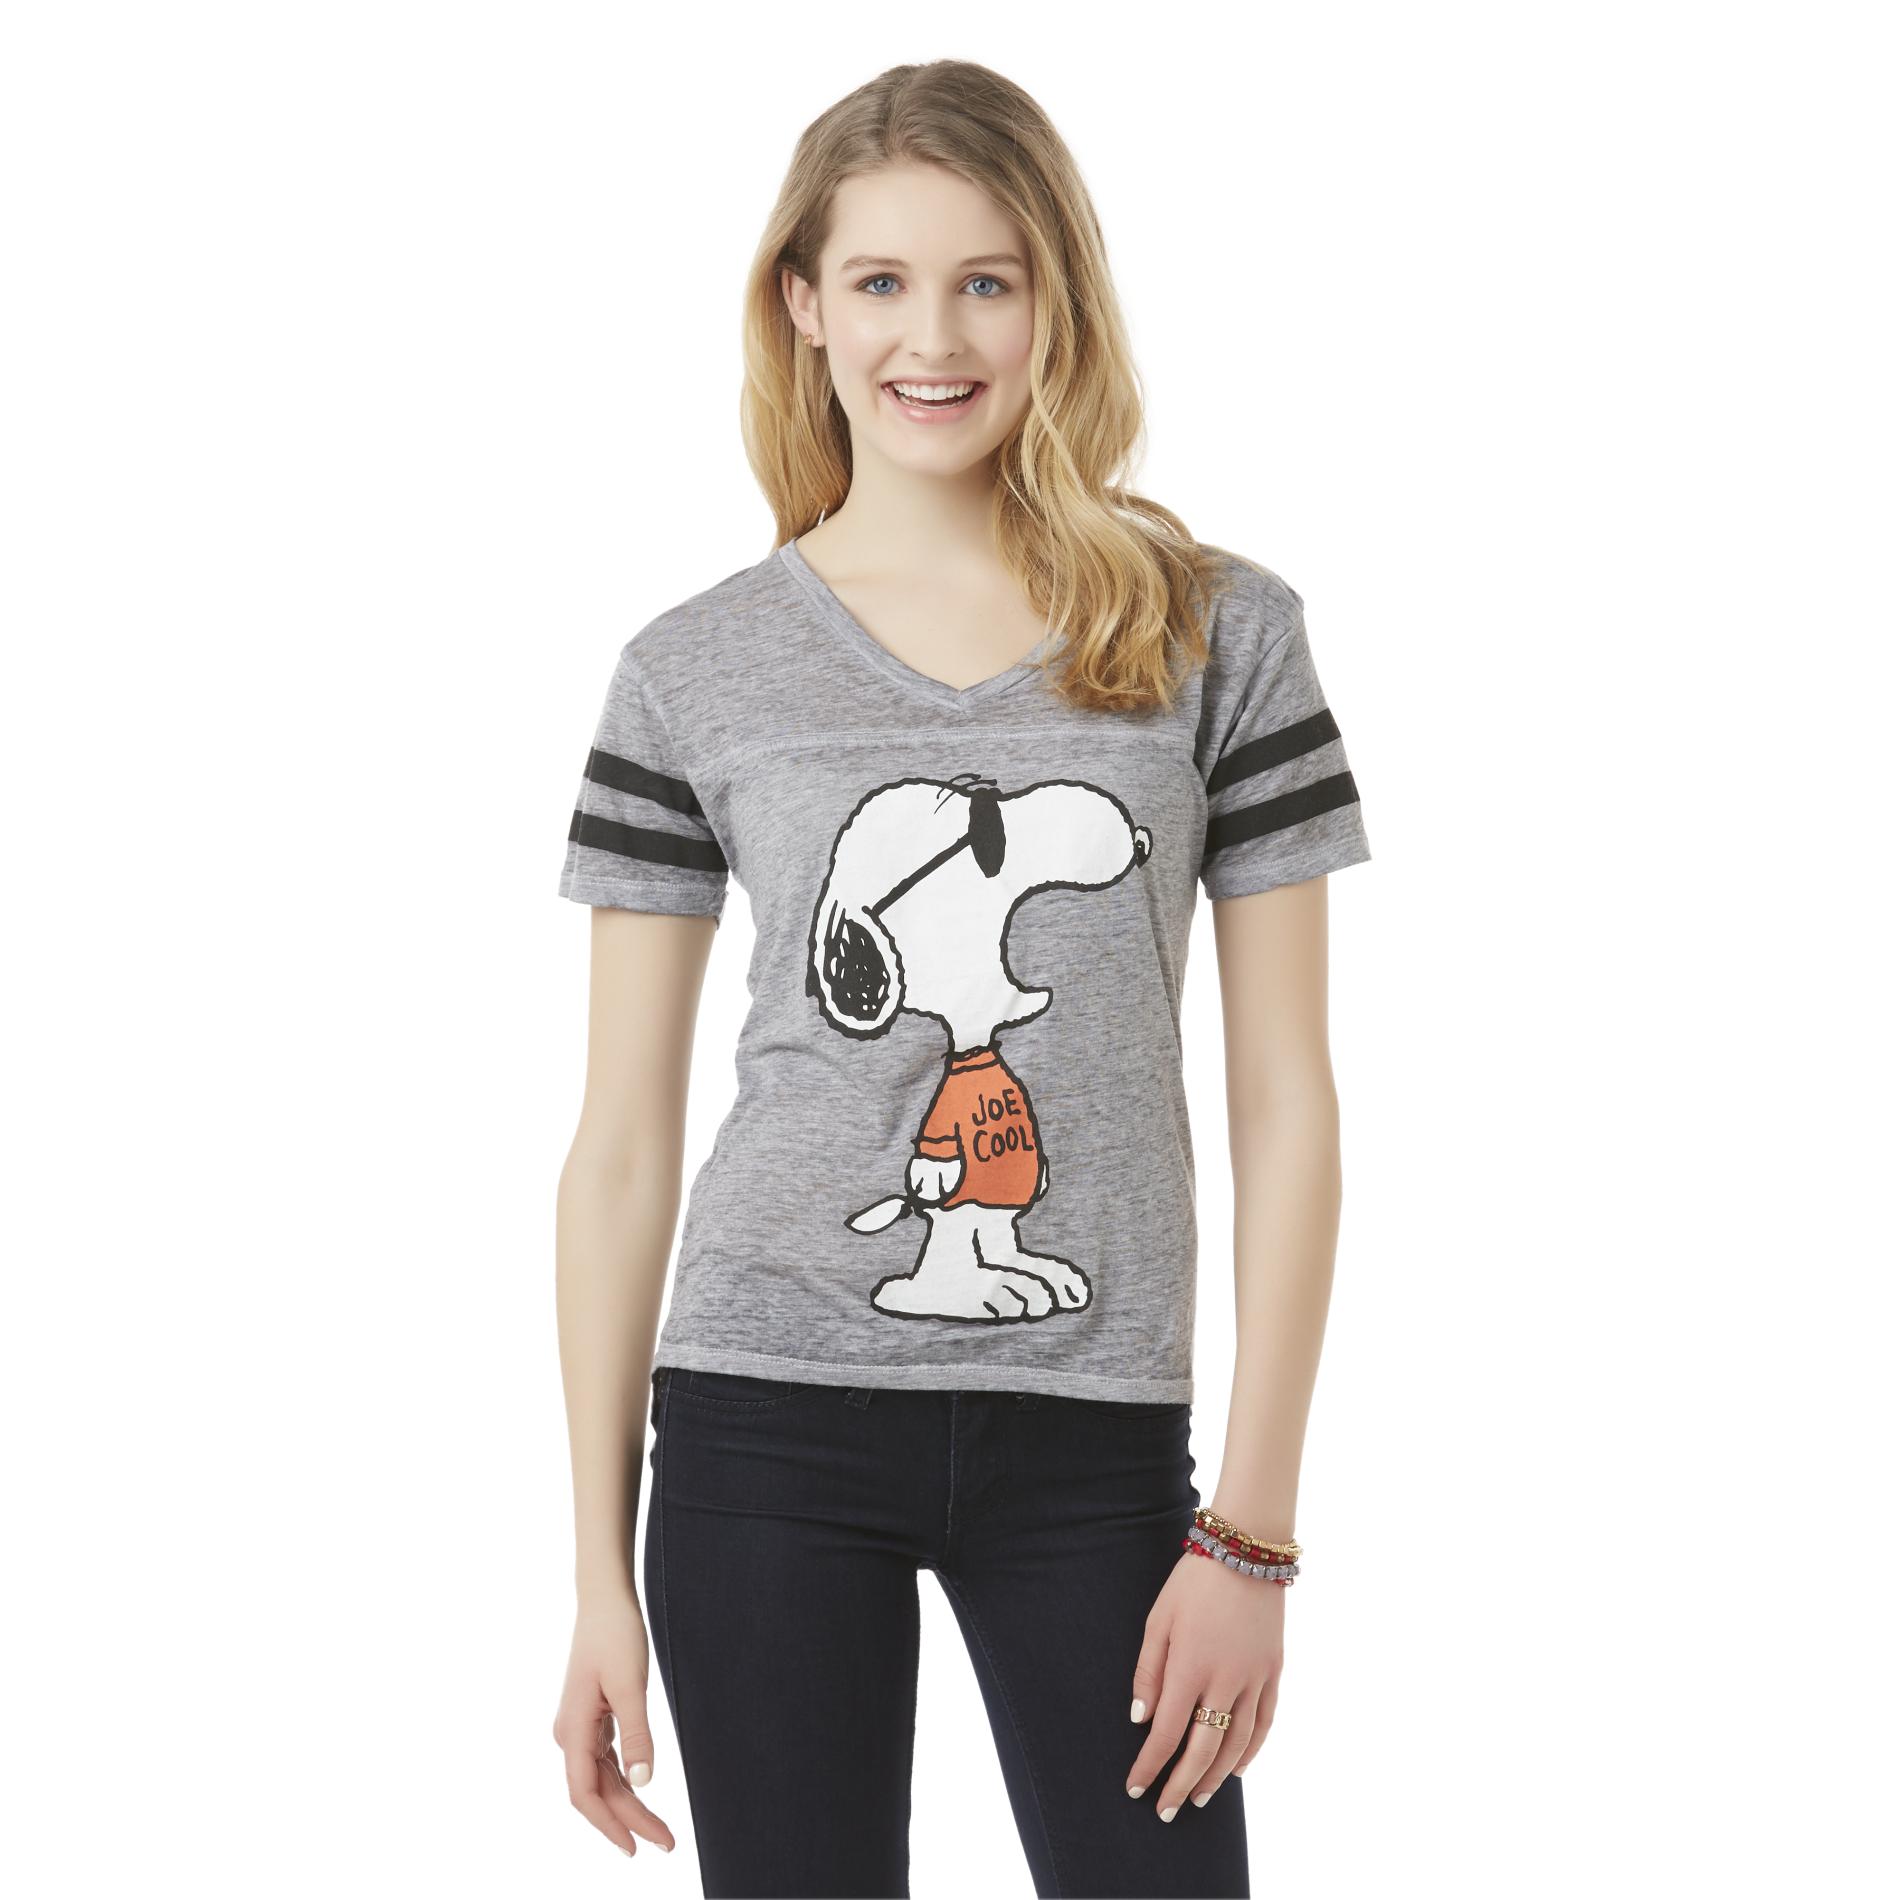 Peanuts By Schulz Junior's Graphic T-Shirt - Snoopy